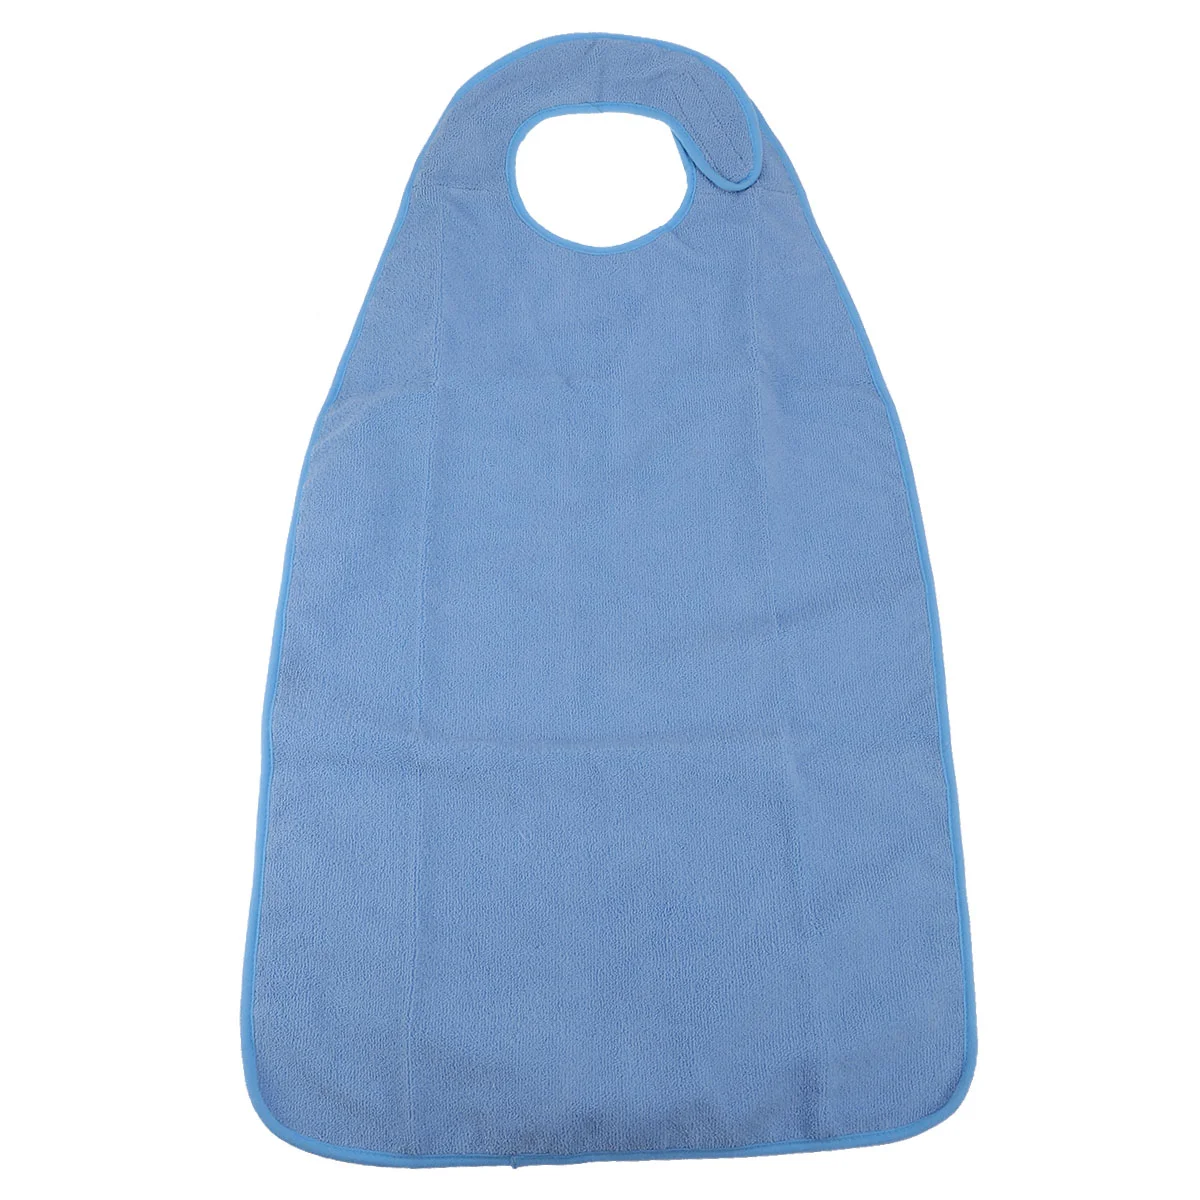 

Bibs Adultmen Protector Elderly Washable Eating Clothing Apron Mealtime Seniors Women Adults Bib Meal People Catcher Dining